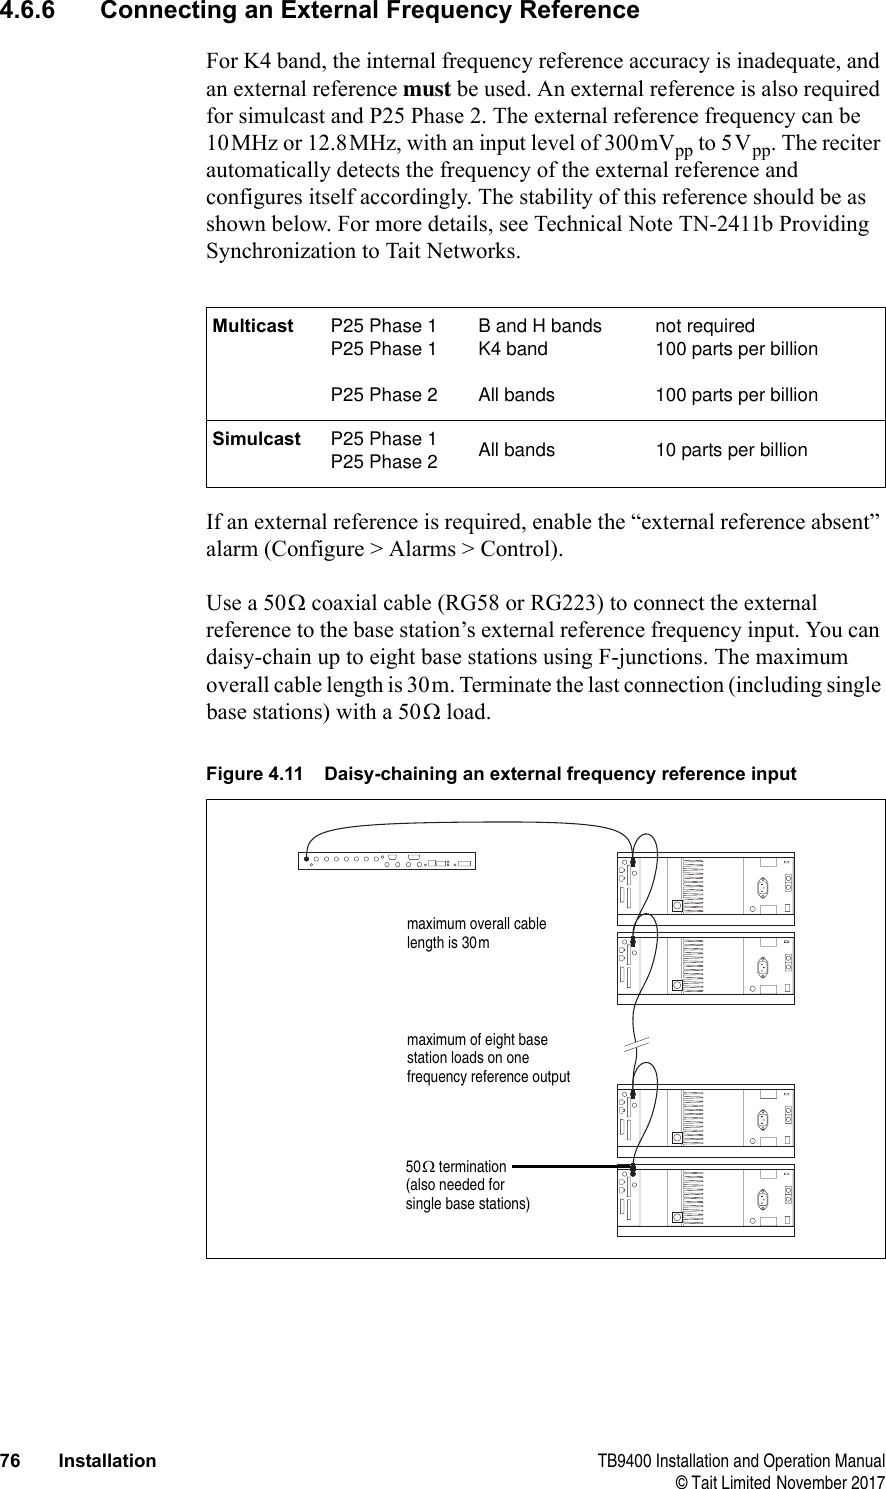  76 Installation TB9400 Installation and Operation Manual© Tait Limited November 20174.6.6 Connecting an External Frequency ReferenceFor K4 band, the internal frequency reference accuracy is inadequate, and an external reference must be used. An external reference is also required for simulcast and P25 Phase 2. The external reference frequency can be 10MHz or 12.8MHz, with an input level of 300mVpp to 5Vpp. The reciter automatically detects the frequency of the external reference and configures itself accordingly. The stability of this reference should be as shown below. For more details, see Technical Note TN-2411b Providing Synchronization to Tait Networks.If an external reference is required, enable the “external reference absent” alarm (Configure &gt; Alarms &gt; Control).Use a 50Ω coaxial cable (RG58 or RG223) to connect the external reference to the base station’s external reference frequency input. You can daisy-chain up to eight base stations using F-junctions. The maximum overall cable length is 30m. Terminate the last connection (including single base stations) with a 50Ω load.Multicast P25 Phase 1P25 Phase 1P25 Phase 2B and H bandsK4 bandAll bandsnot required100 parts per billion100 parts per billionSimulcast P25 Phase 1P25 Phase 2 All bands 10 parts per billionFigure 4.11 Daisy-chaining an external frequency reference input50Ω termination(also needed forsingle base stations)maximum of eight base station loads on one frequency reference outputmaximum overall cable length is 30m